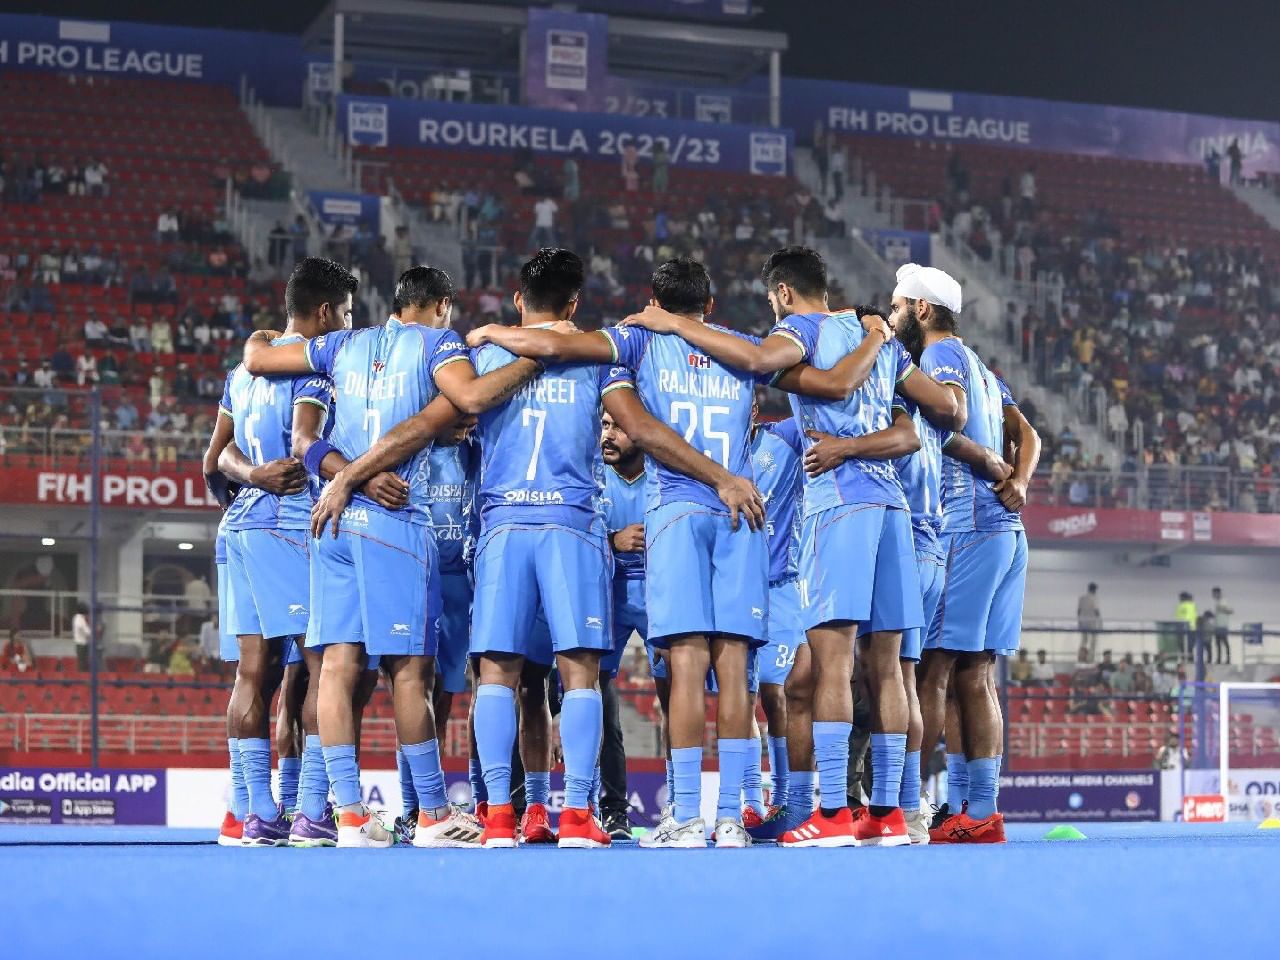 FIH Pro League: Would not make big changes straightaway, says new Indian men’s coach Craig Fulton